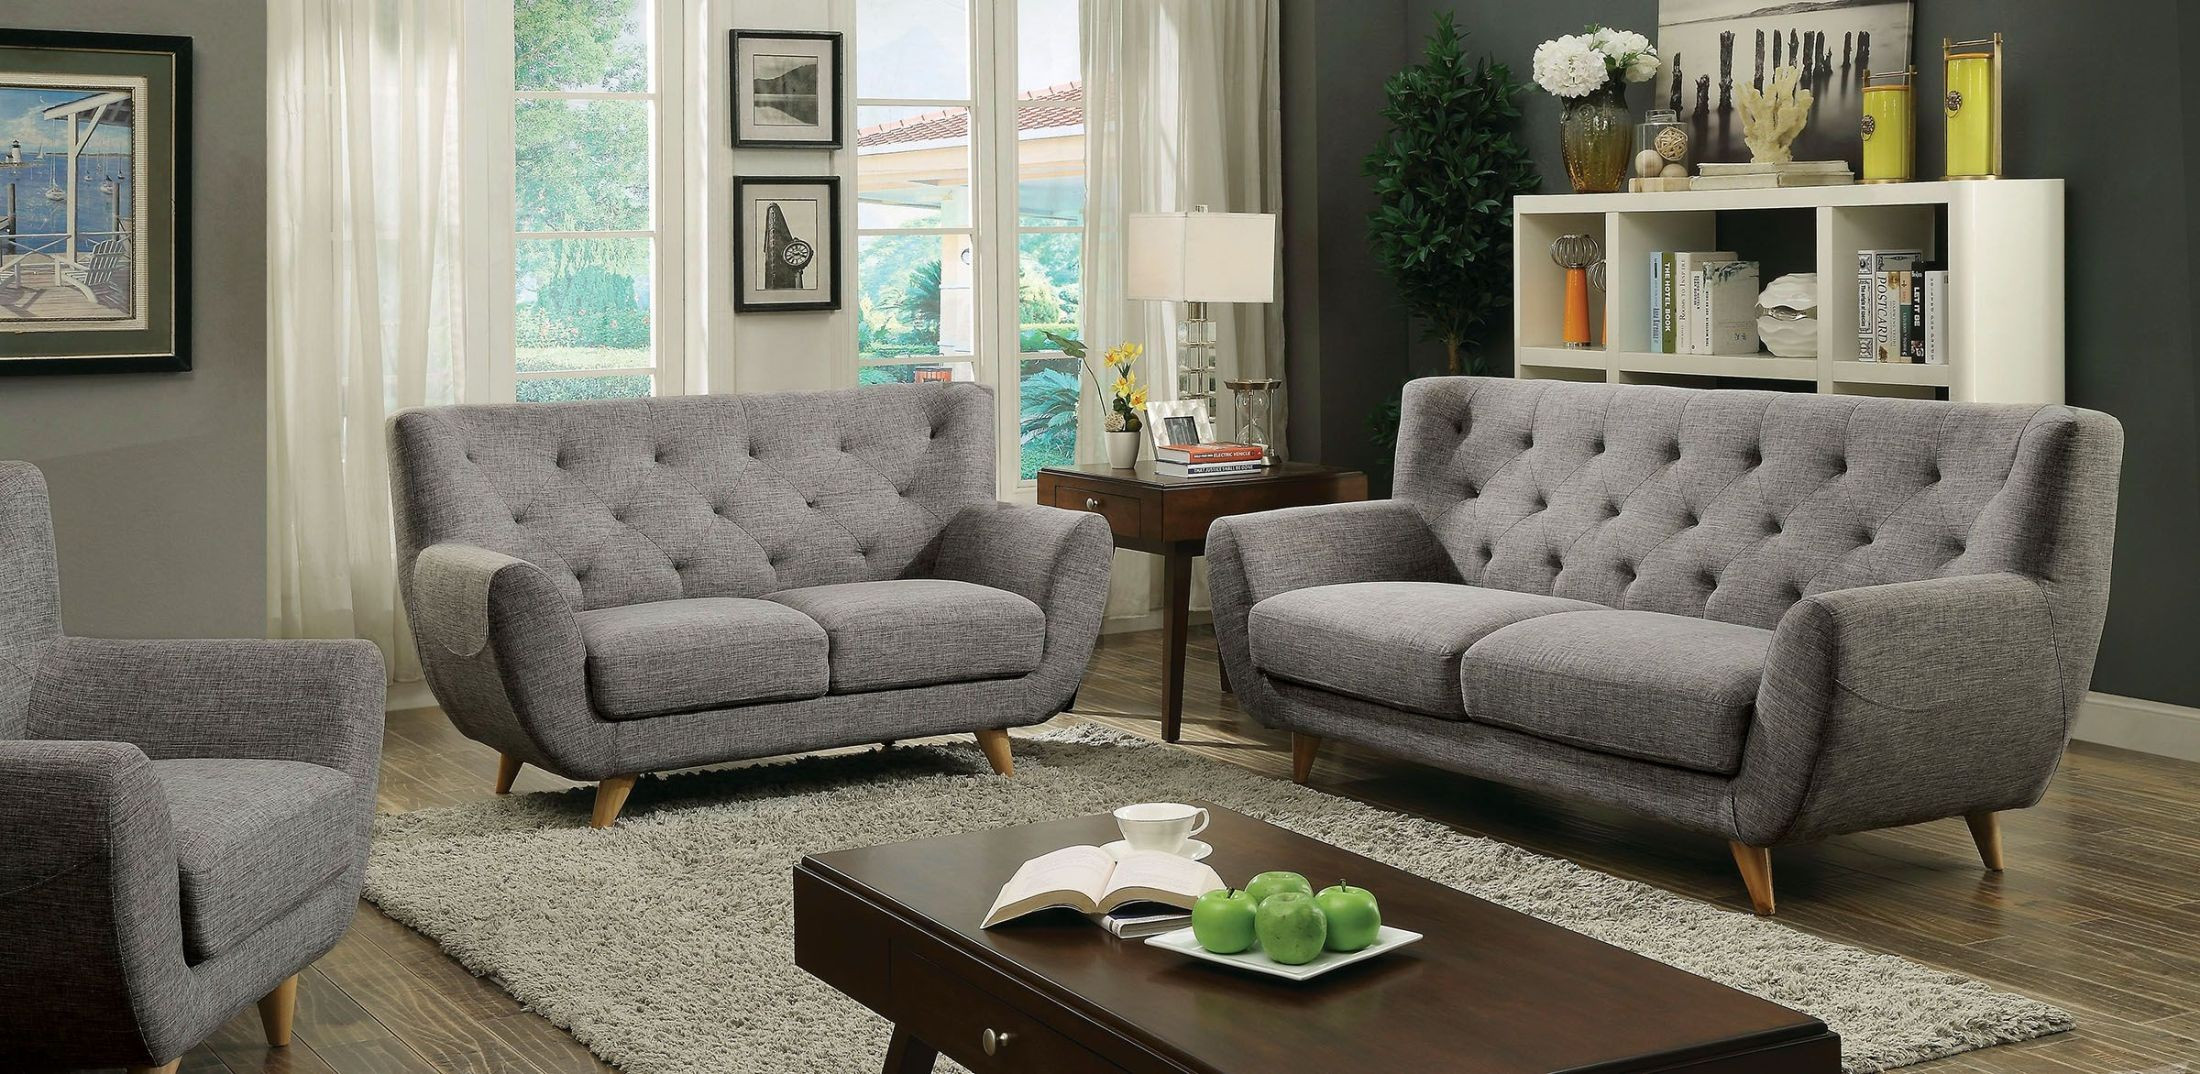 Gray Living Room Chairs
 Carin Light Gray Living Room Set from Furniture of America